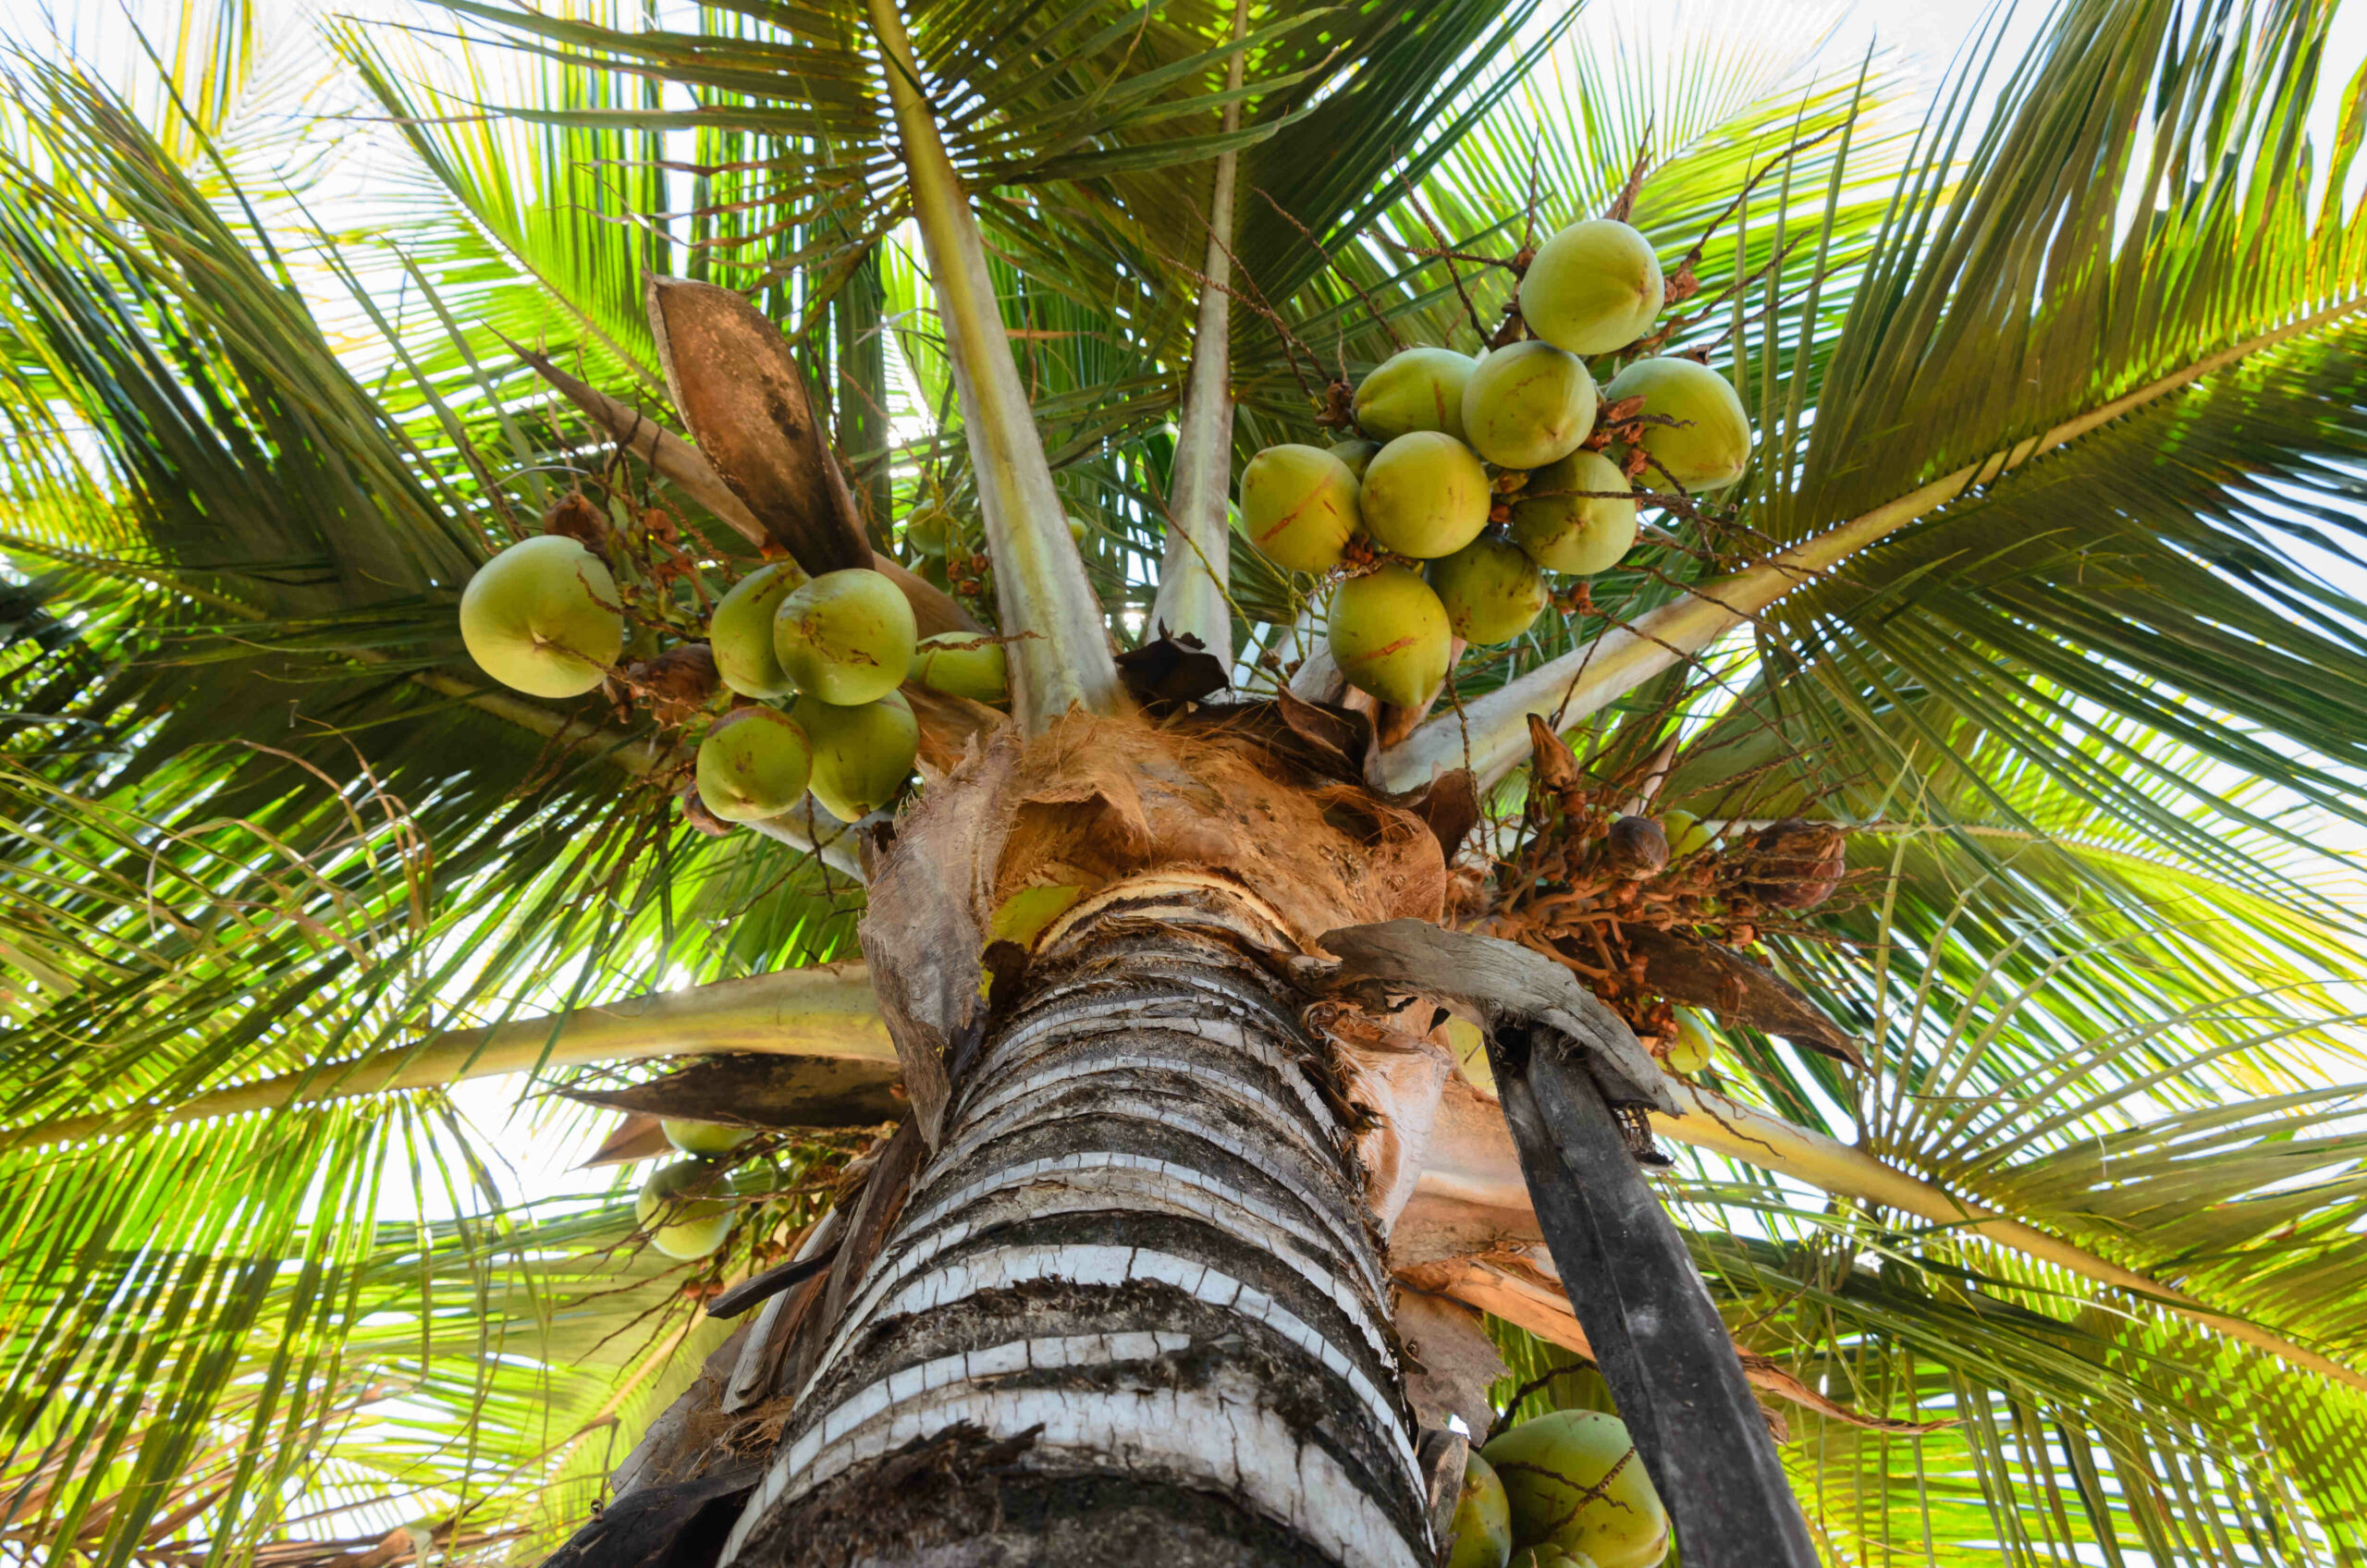 How old do coconut trees live?